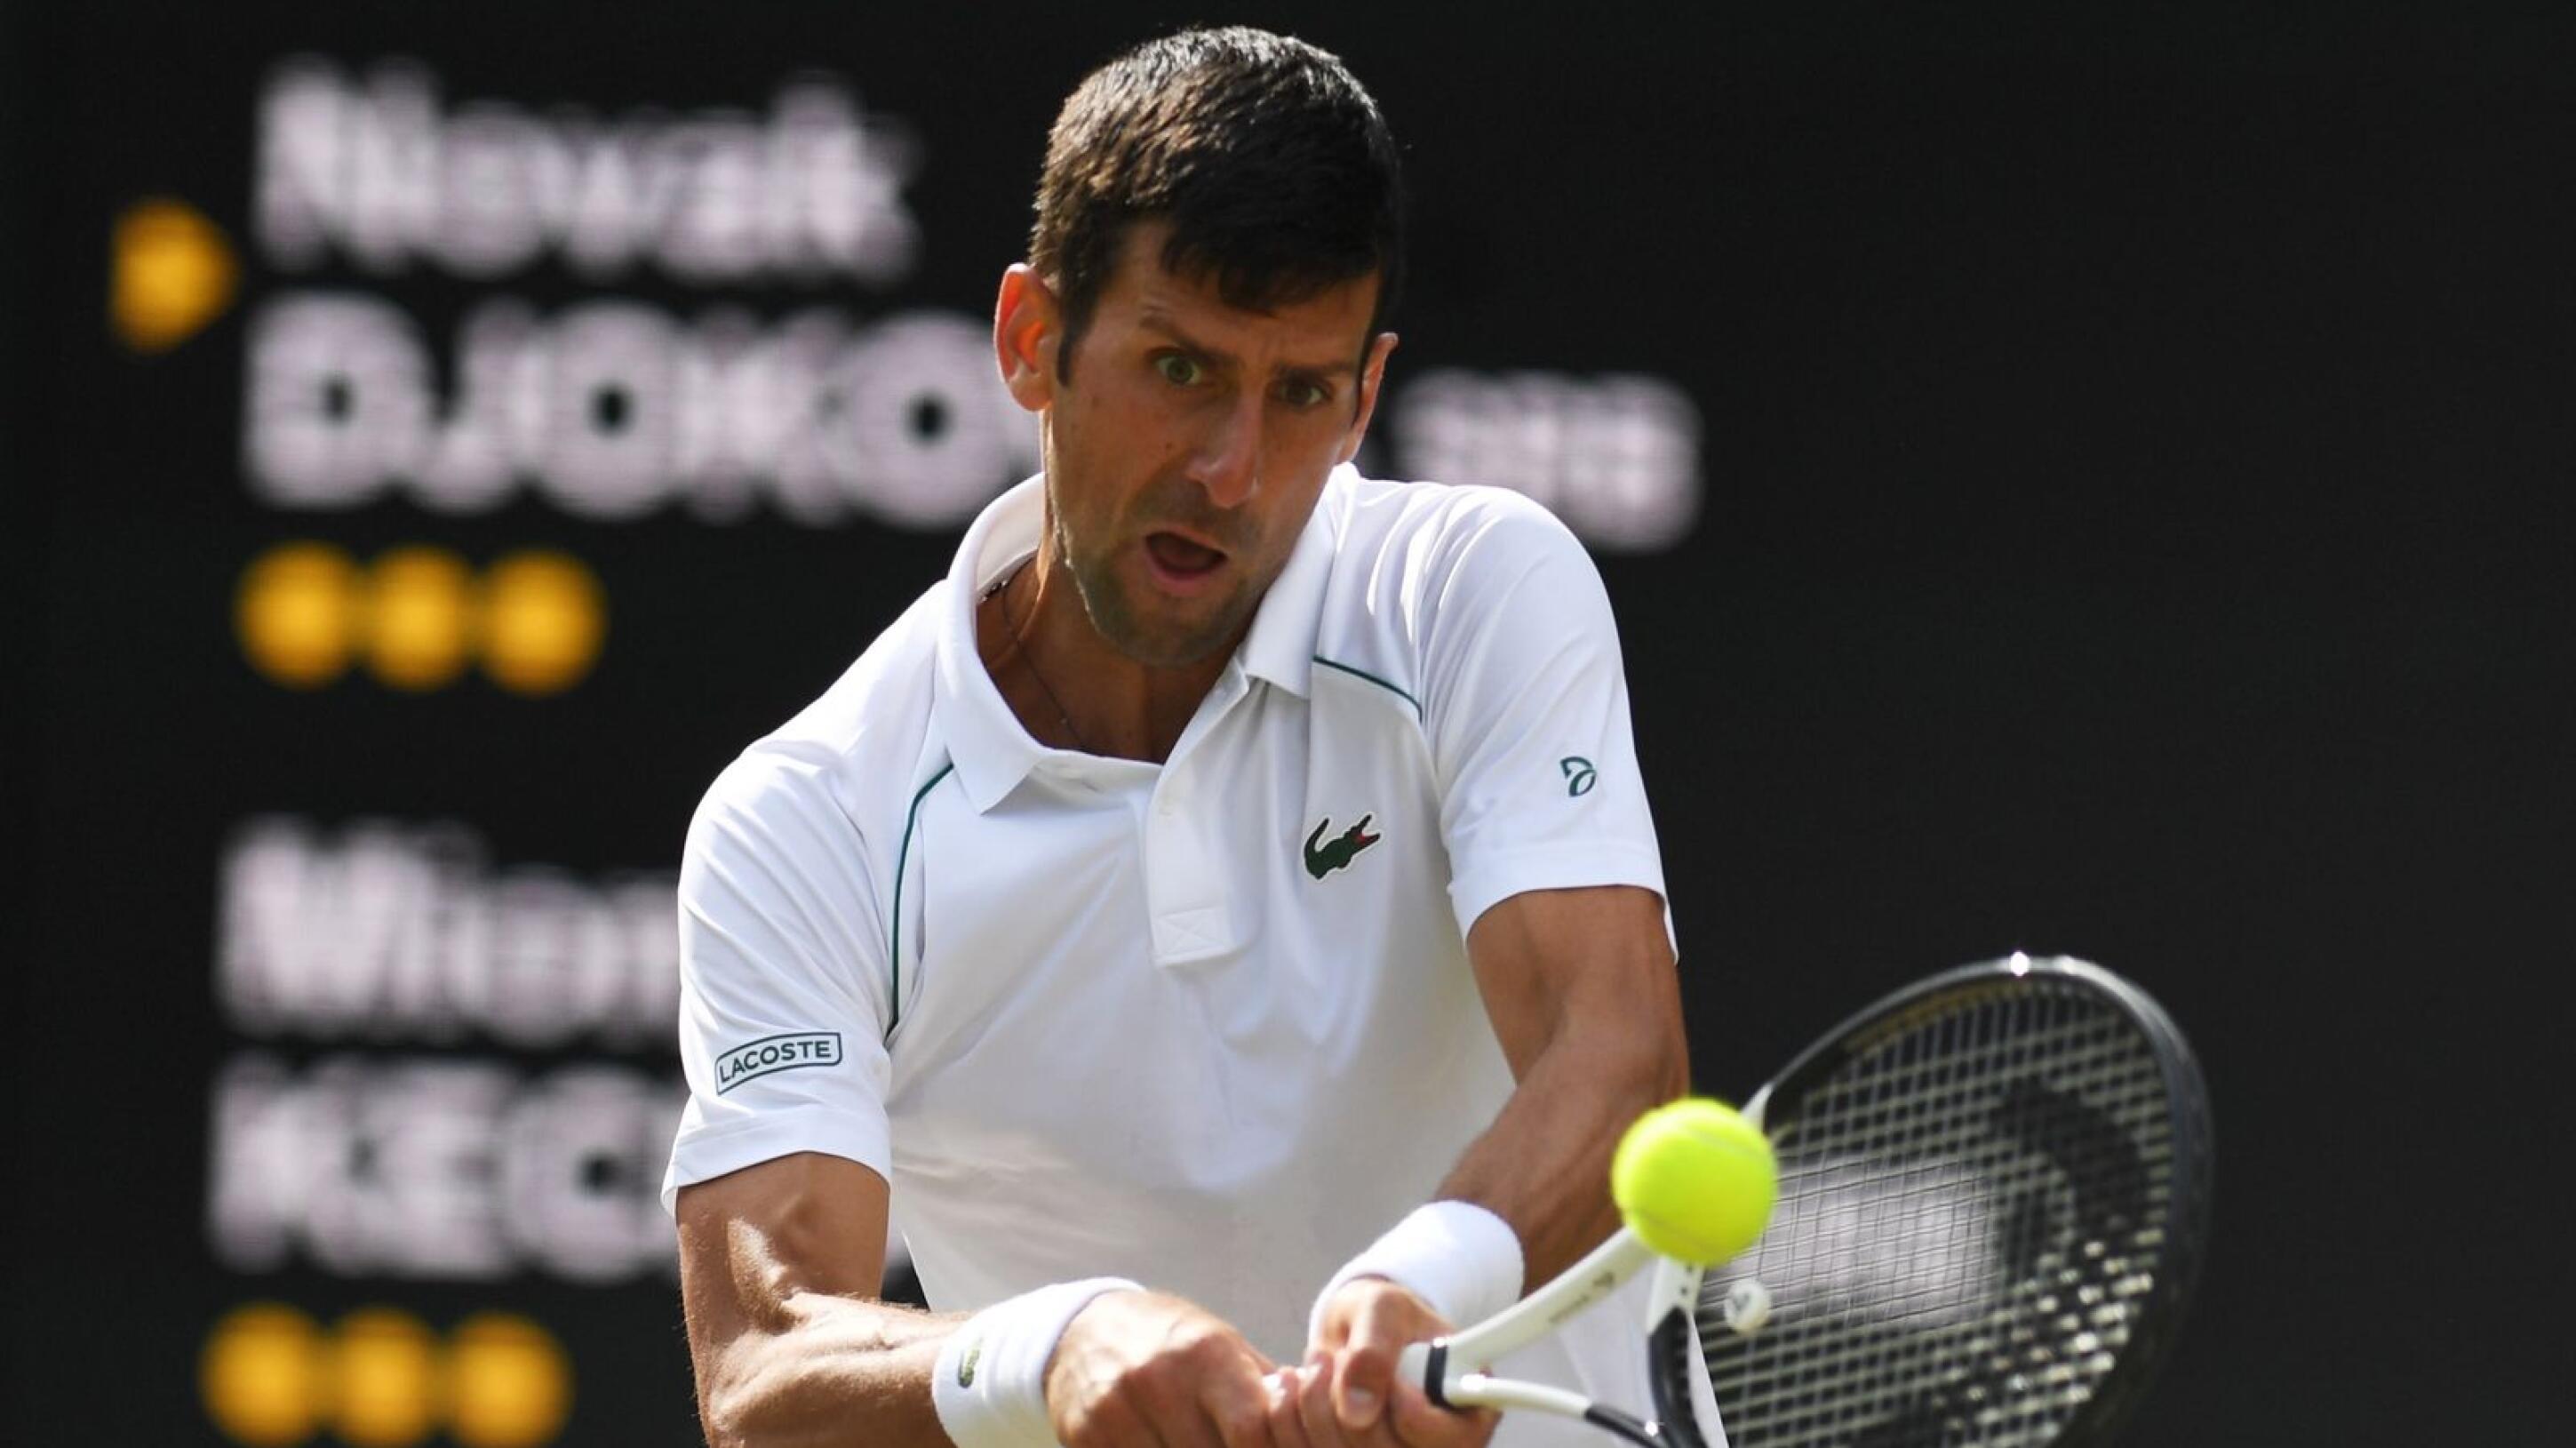 Novak Djokovic of Serbia in action in the men's third round match against Miomir Kecmanovic of Serbia at the Wimbledon Championships, in Wimbledon, Britain